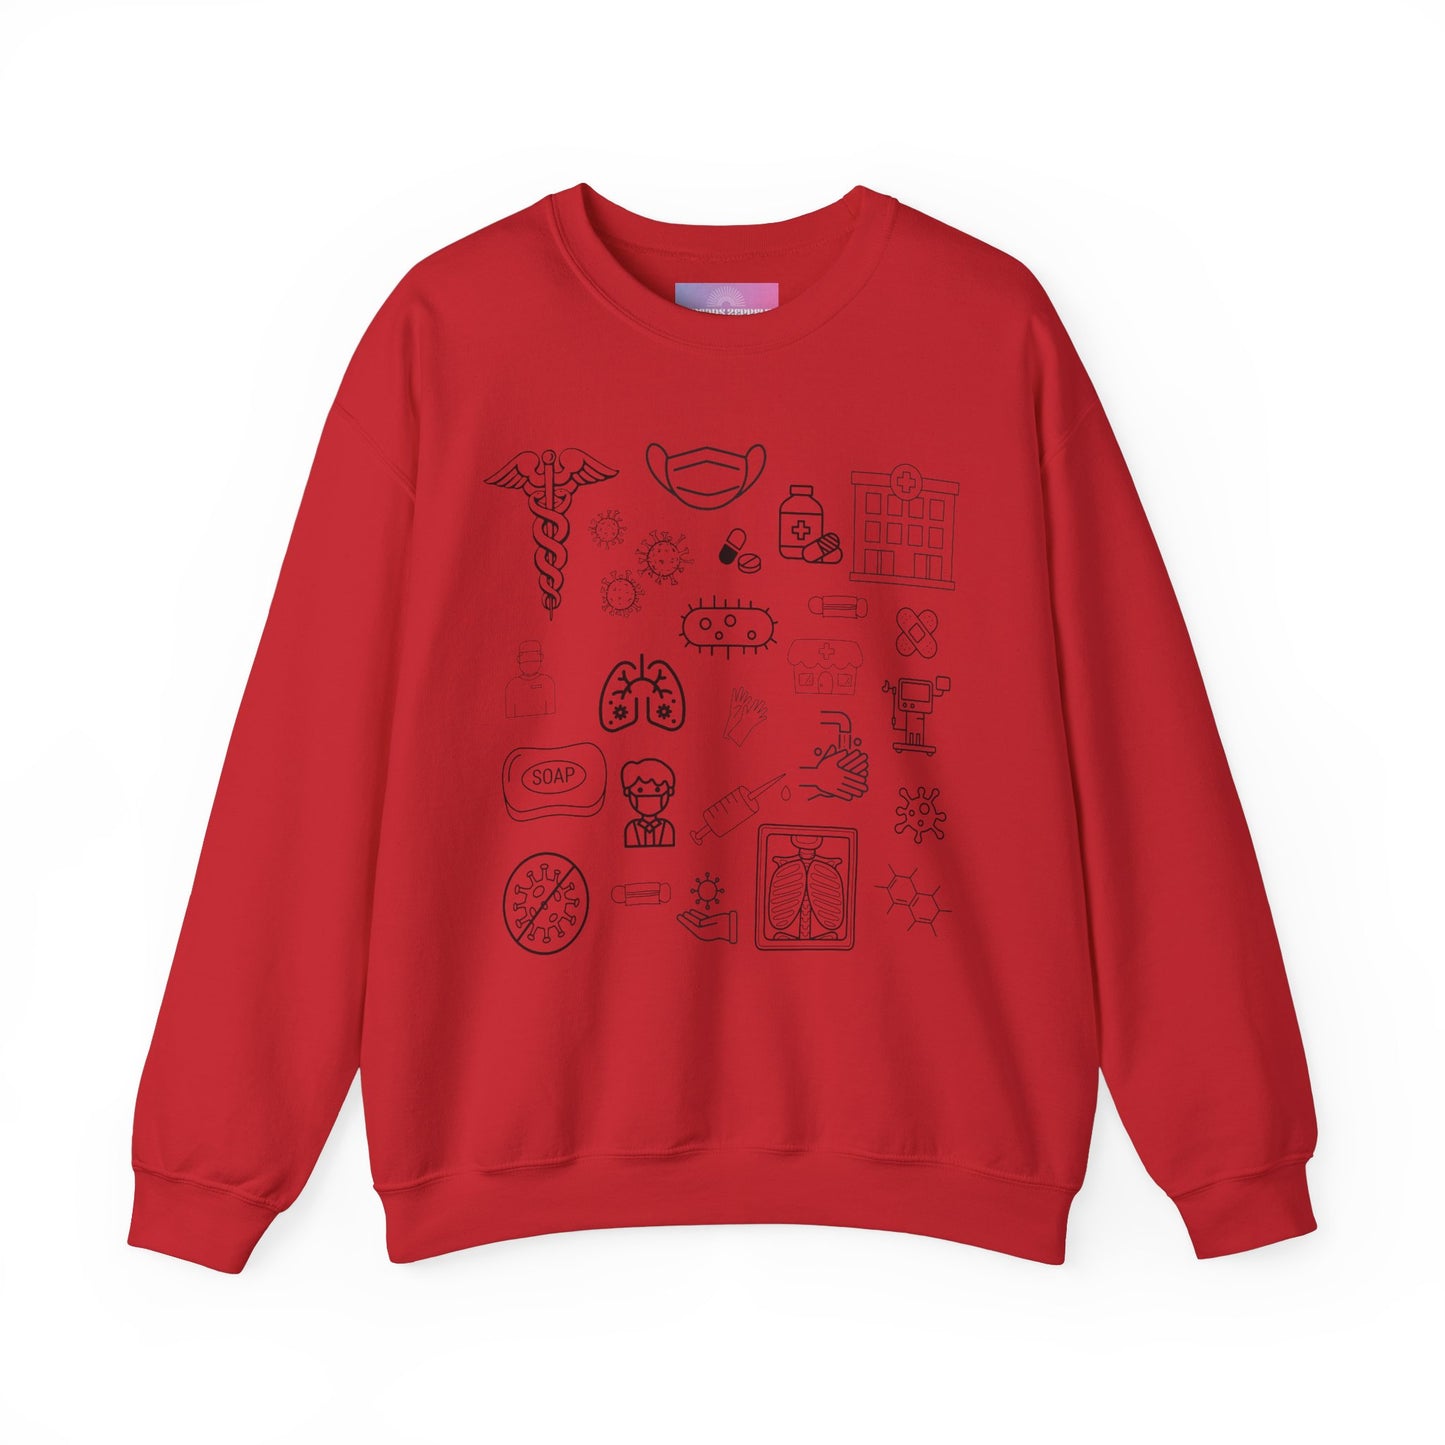 Infectious Disease Doodle Drawing Sweatshirt, Gift for ID Doctor, Microbiology, Epidemiology, Public Health, ID Specialist